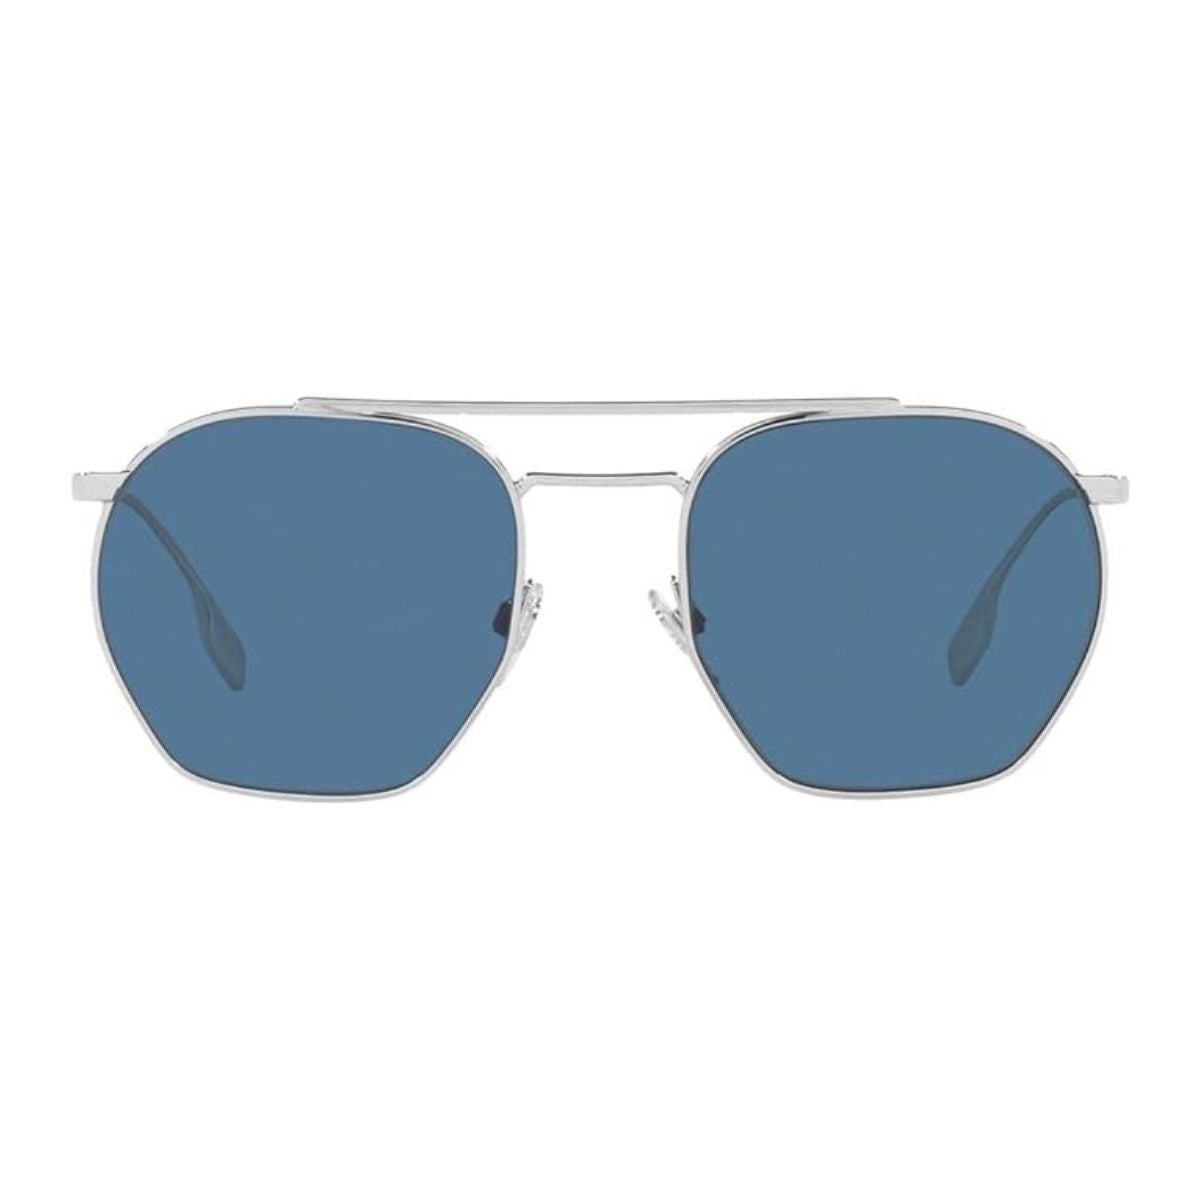 "Dark blue Burberry 3126 square sunglasses displayed on a wooden surface, highlighting the sleek design and color, perfect for stylish men."